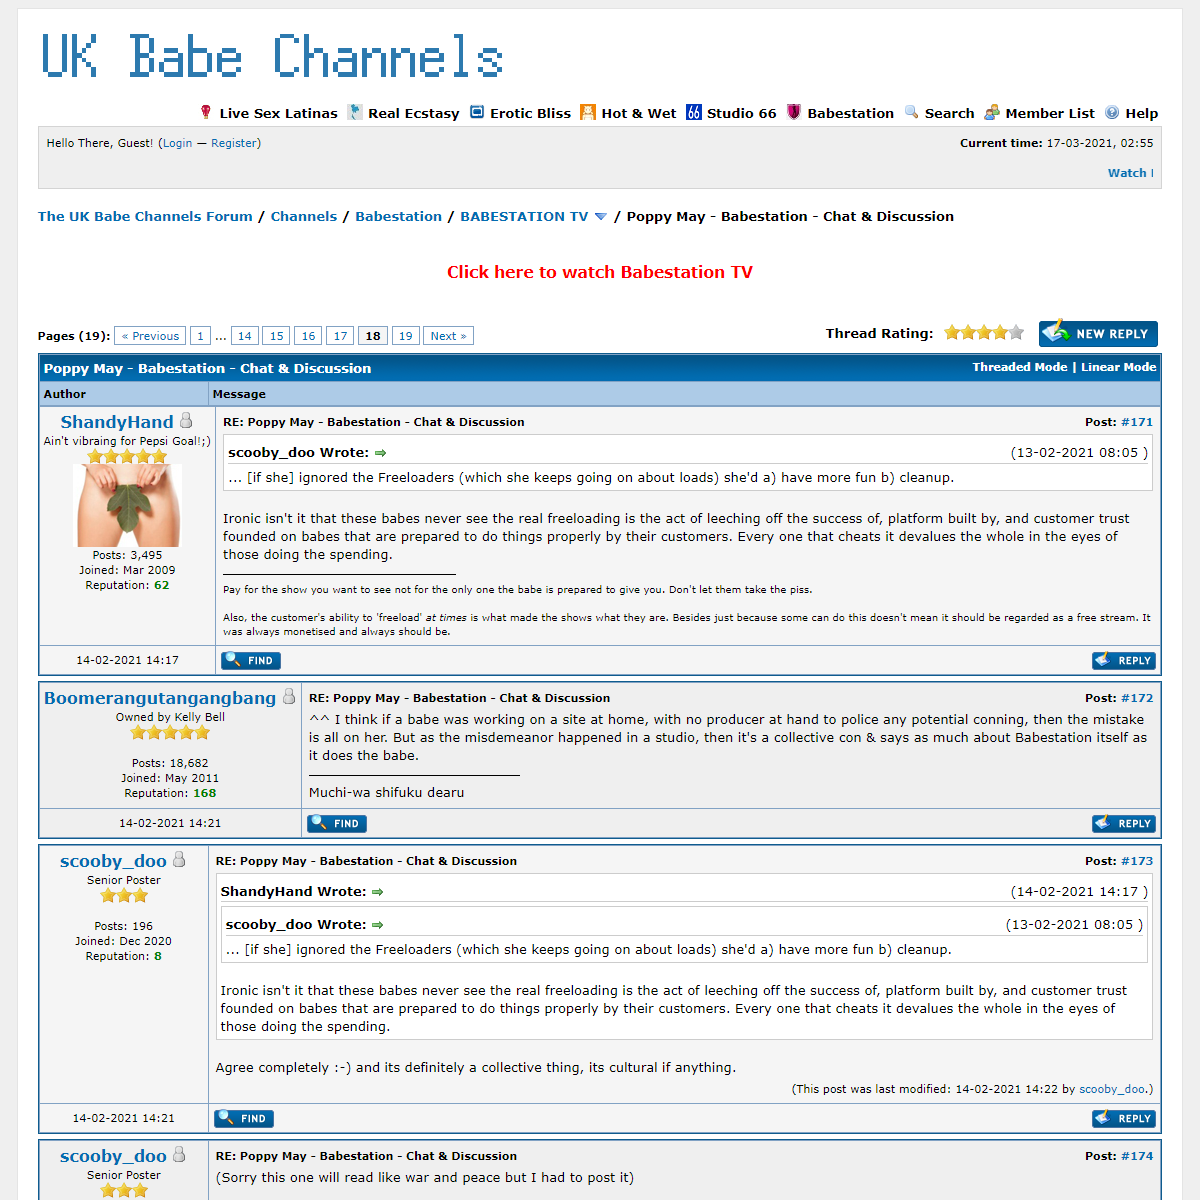 A complete backup of https://www.babeshows.co.uk/showthread.php?tid=77044&page=18